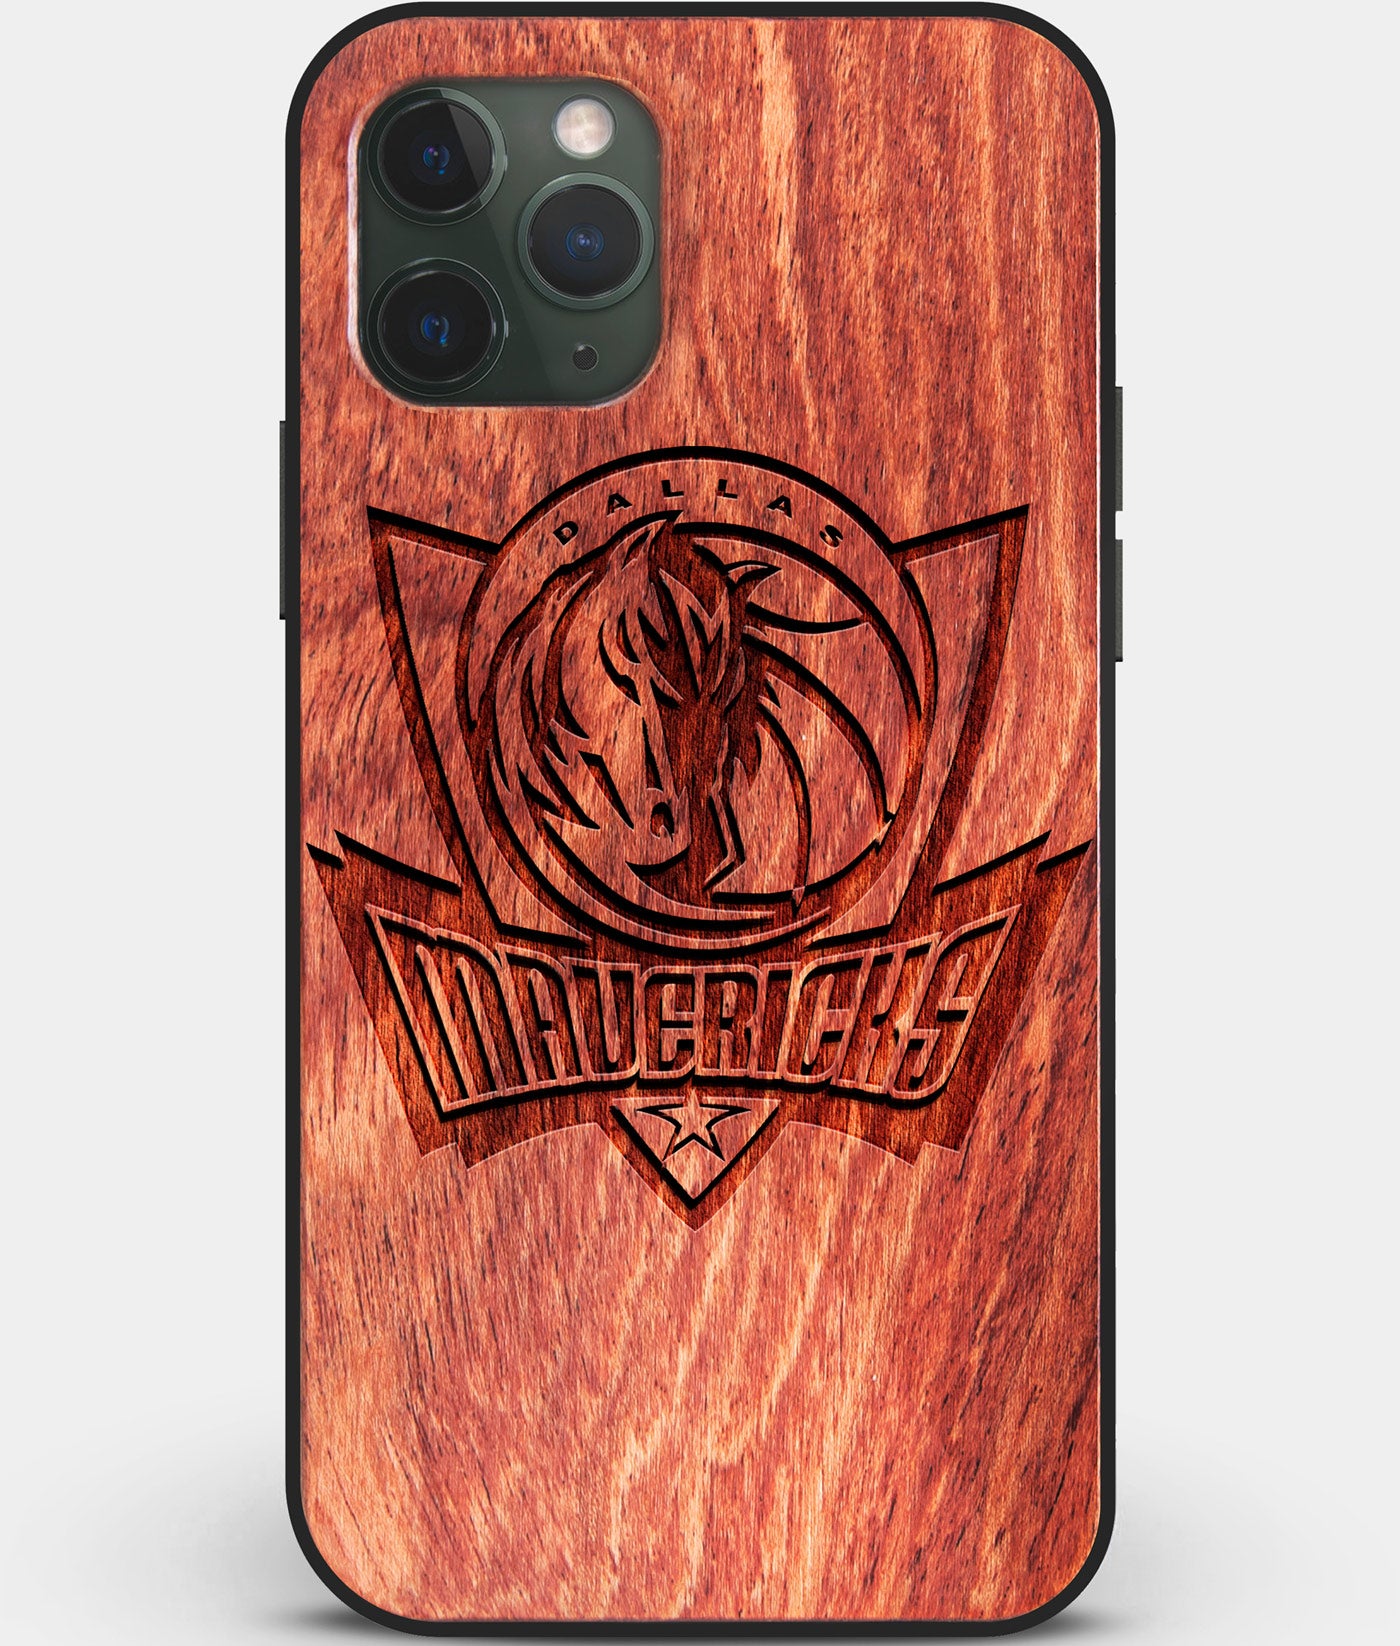 Custom Carved Wood Dallas Mavericks iPhone 11 Pro Max Case | Personalized Mahogany Wood Dallas Mavericks Cover, Birthday Gift, Gifts For Him, Monogrammed Gift For Fan | by Engraved In Nature